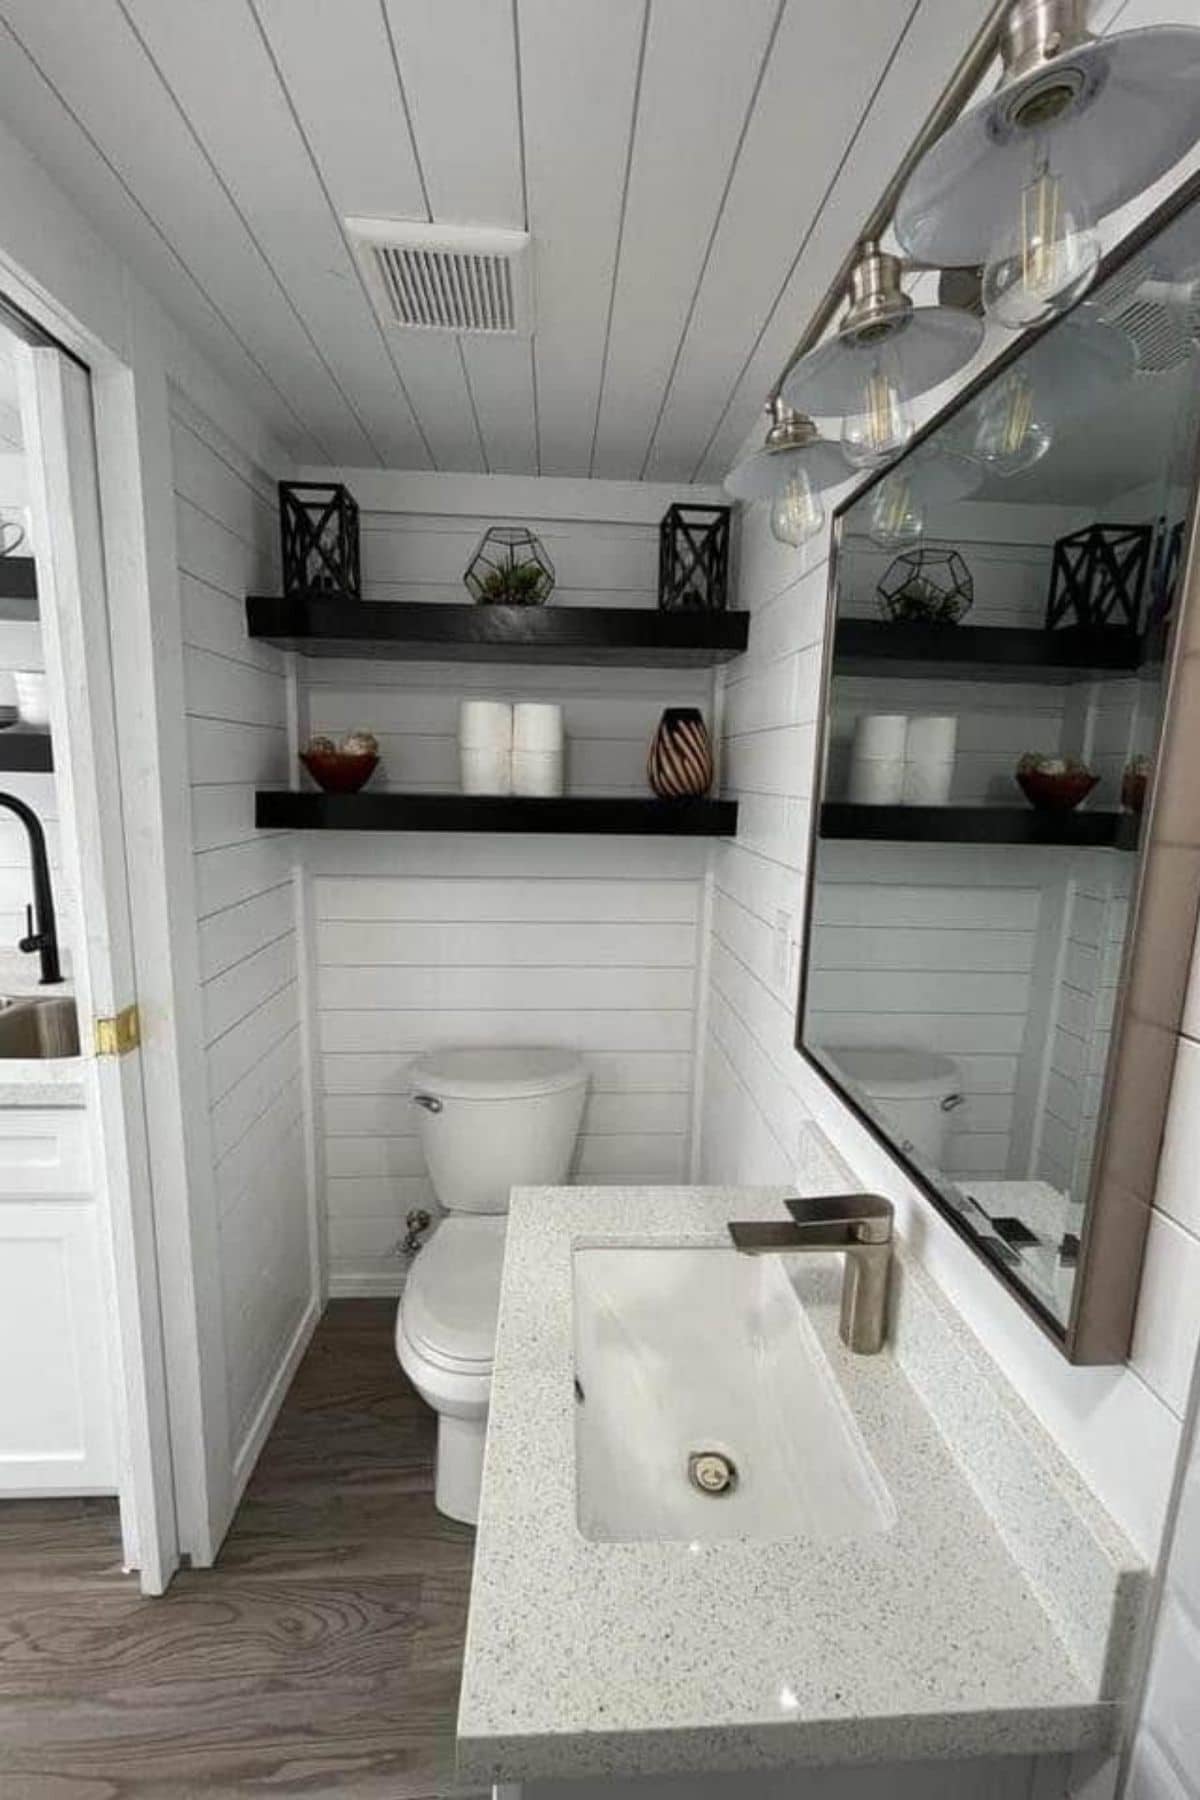 Floating shelves above toilet in tiny bathroom with white sink